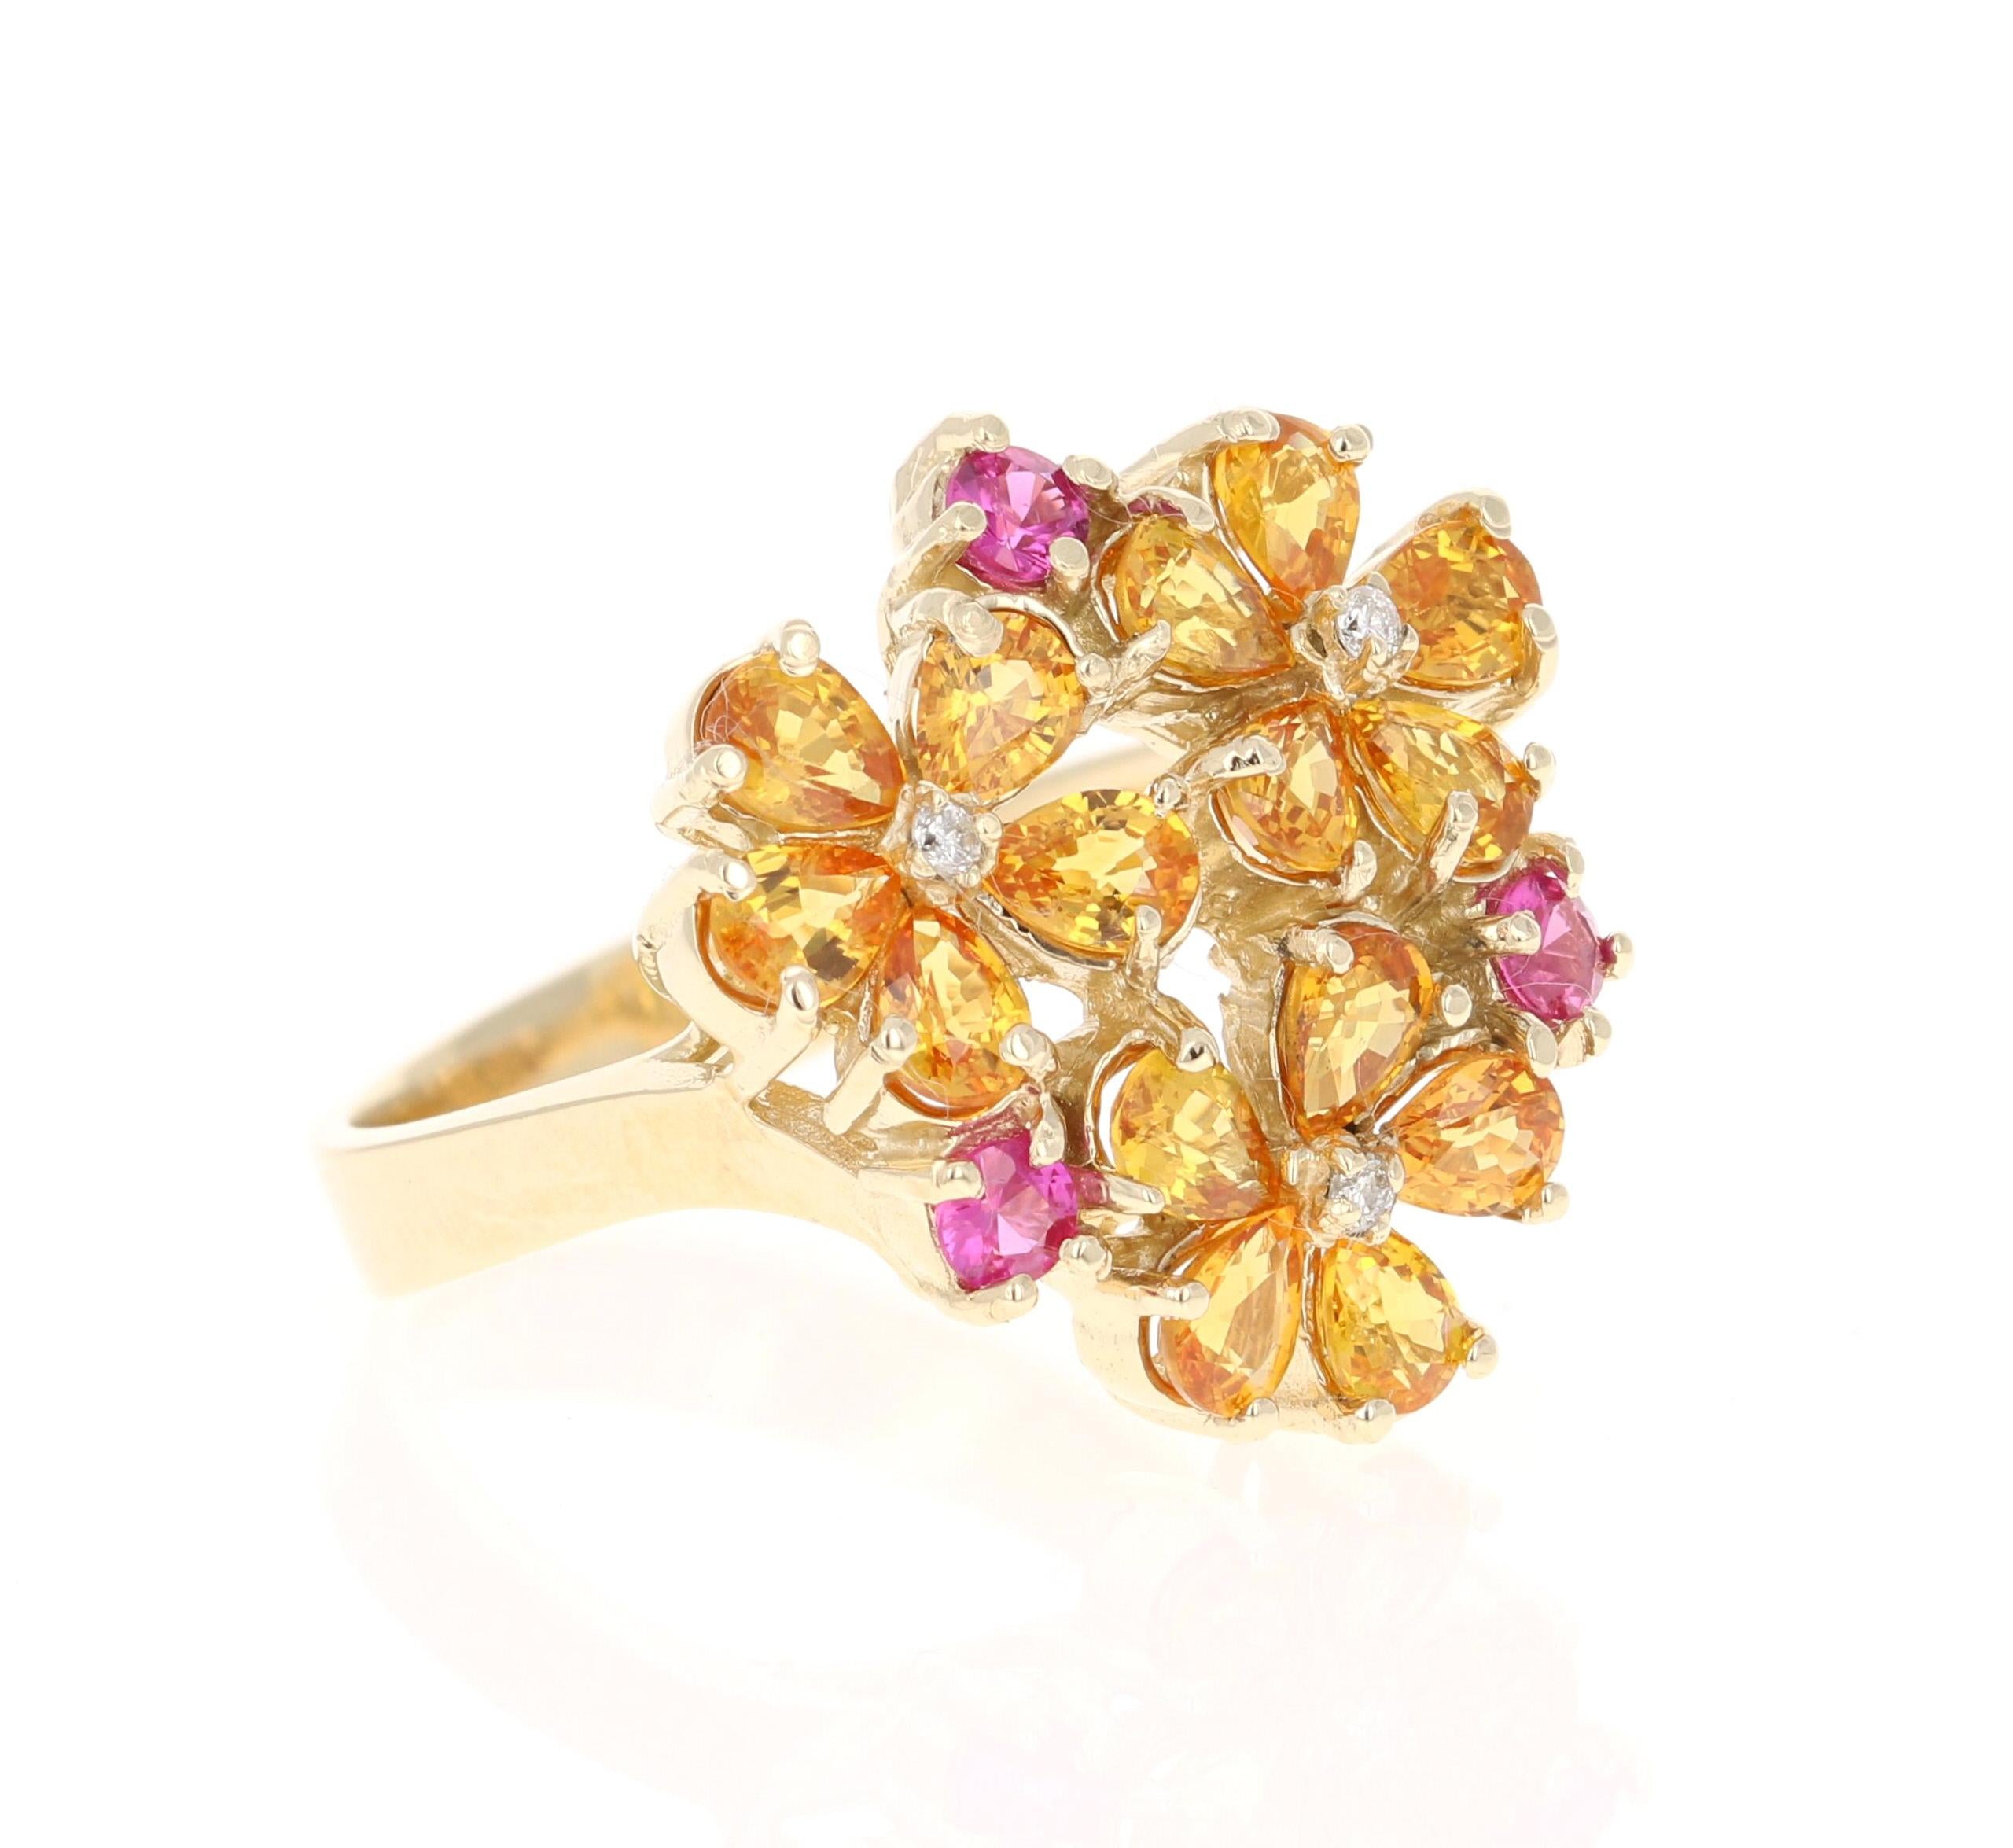 A Stunning and Unique piece to say the least!   Our in-house designer is carefully curated this ring to make it look like the most beautiful flower!

This ring has 15 Pear Cut Yellow Sapphires that weigh 2.62 Carats and 3 Round Pink Sapphires that